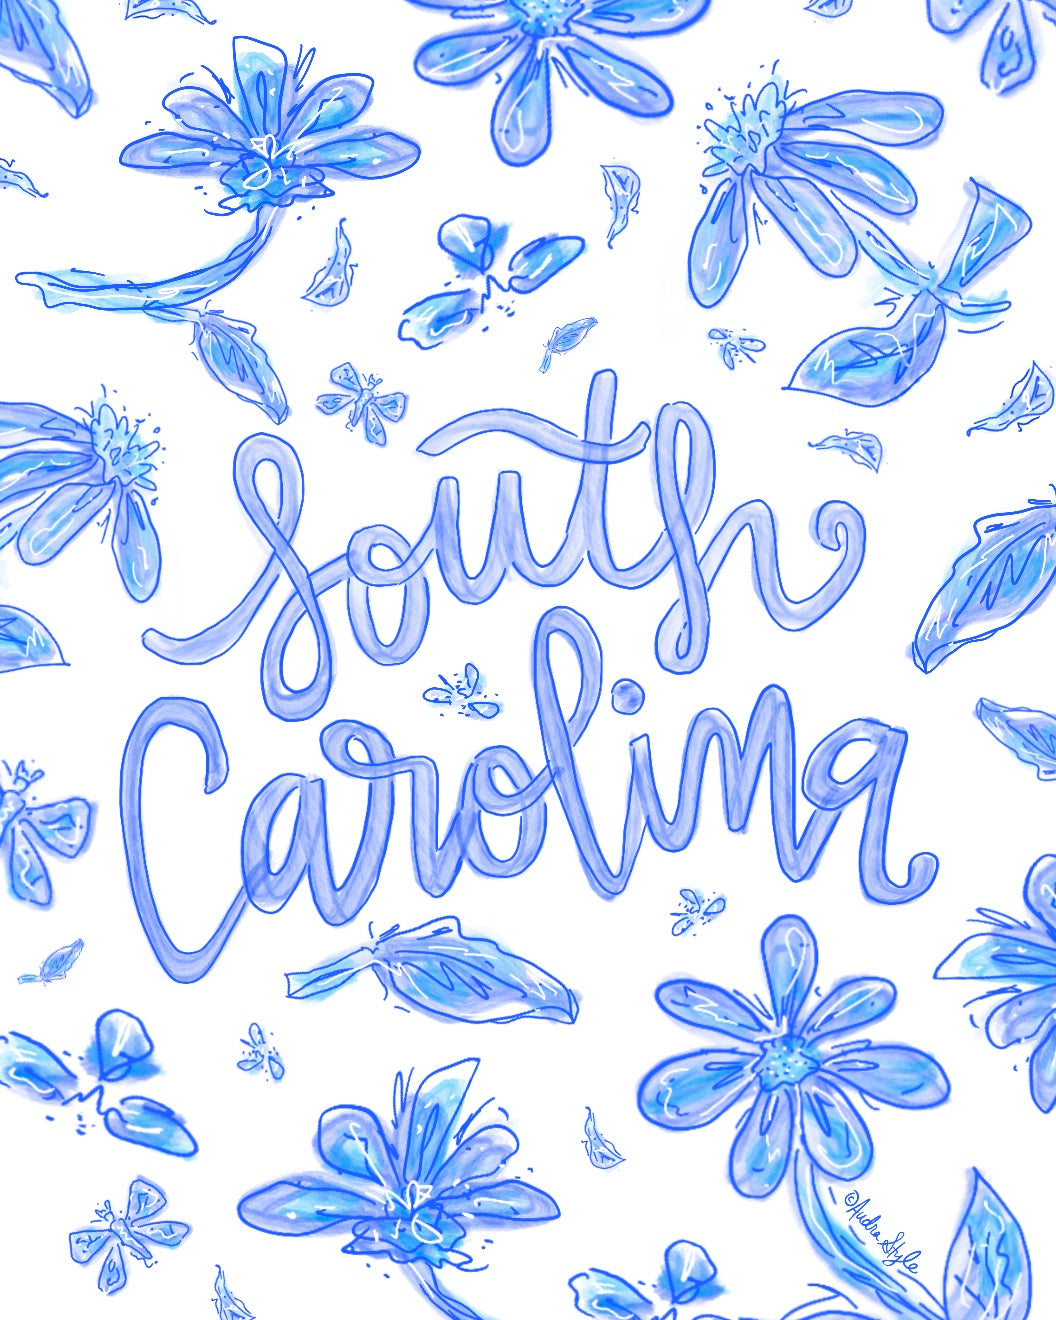 Blue and White South Carolina Floral Reproduction Print